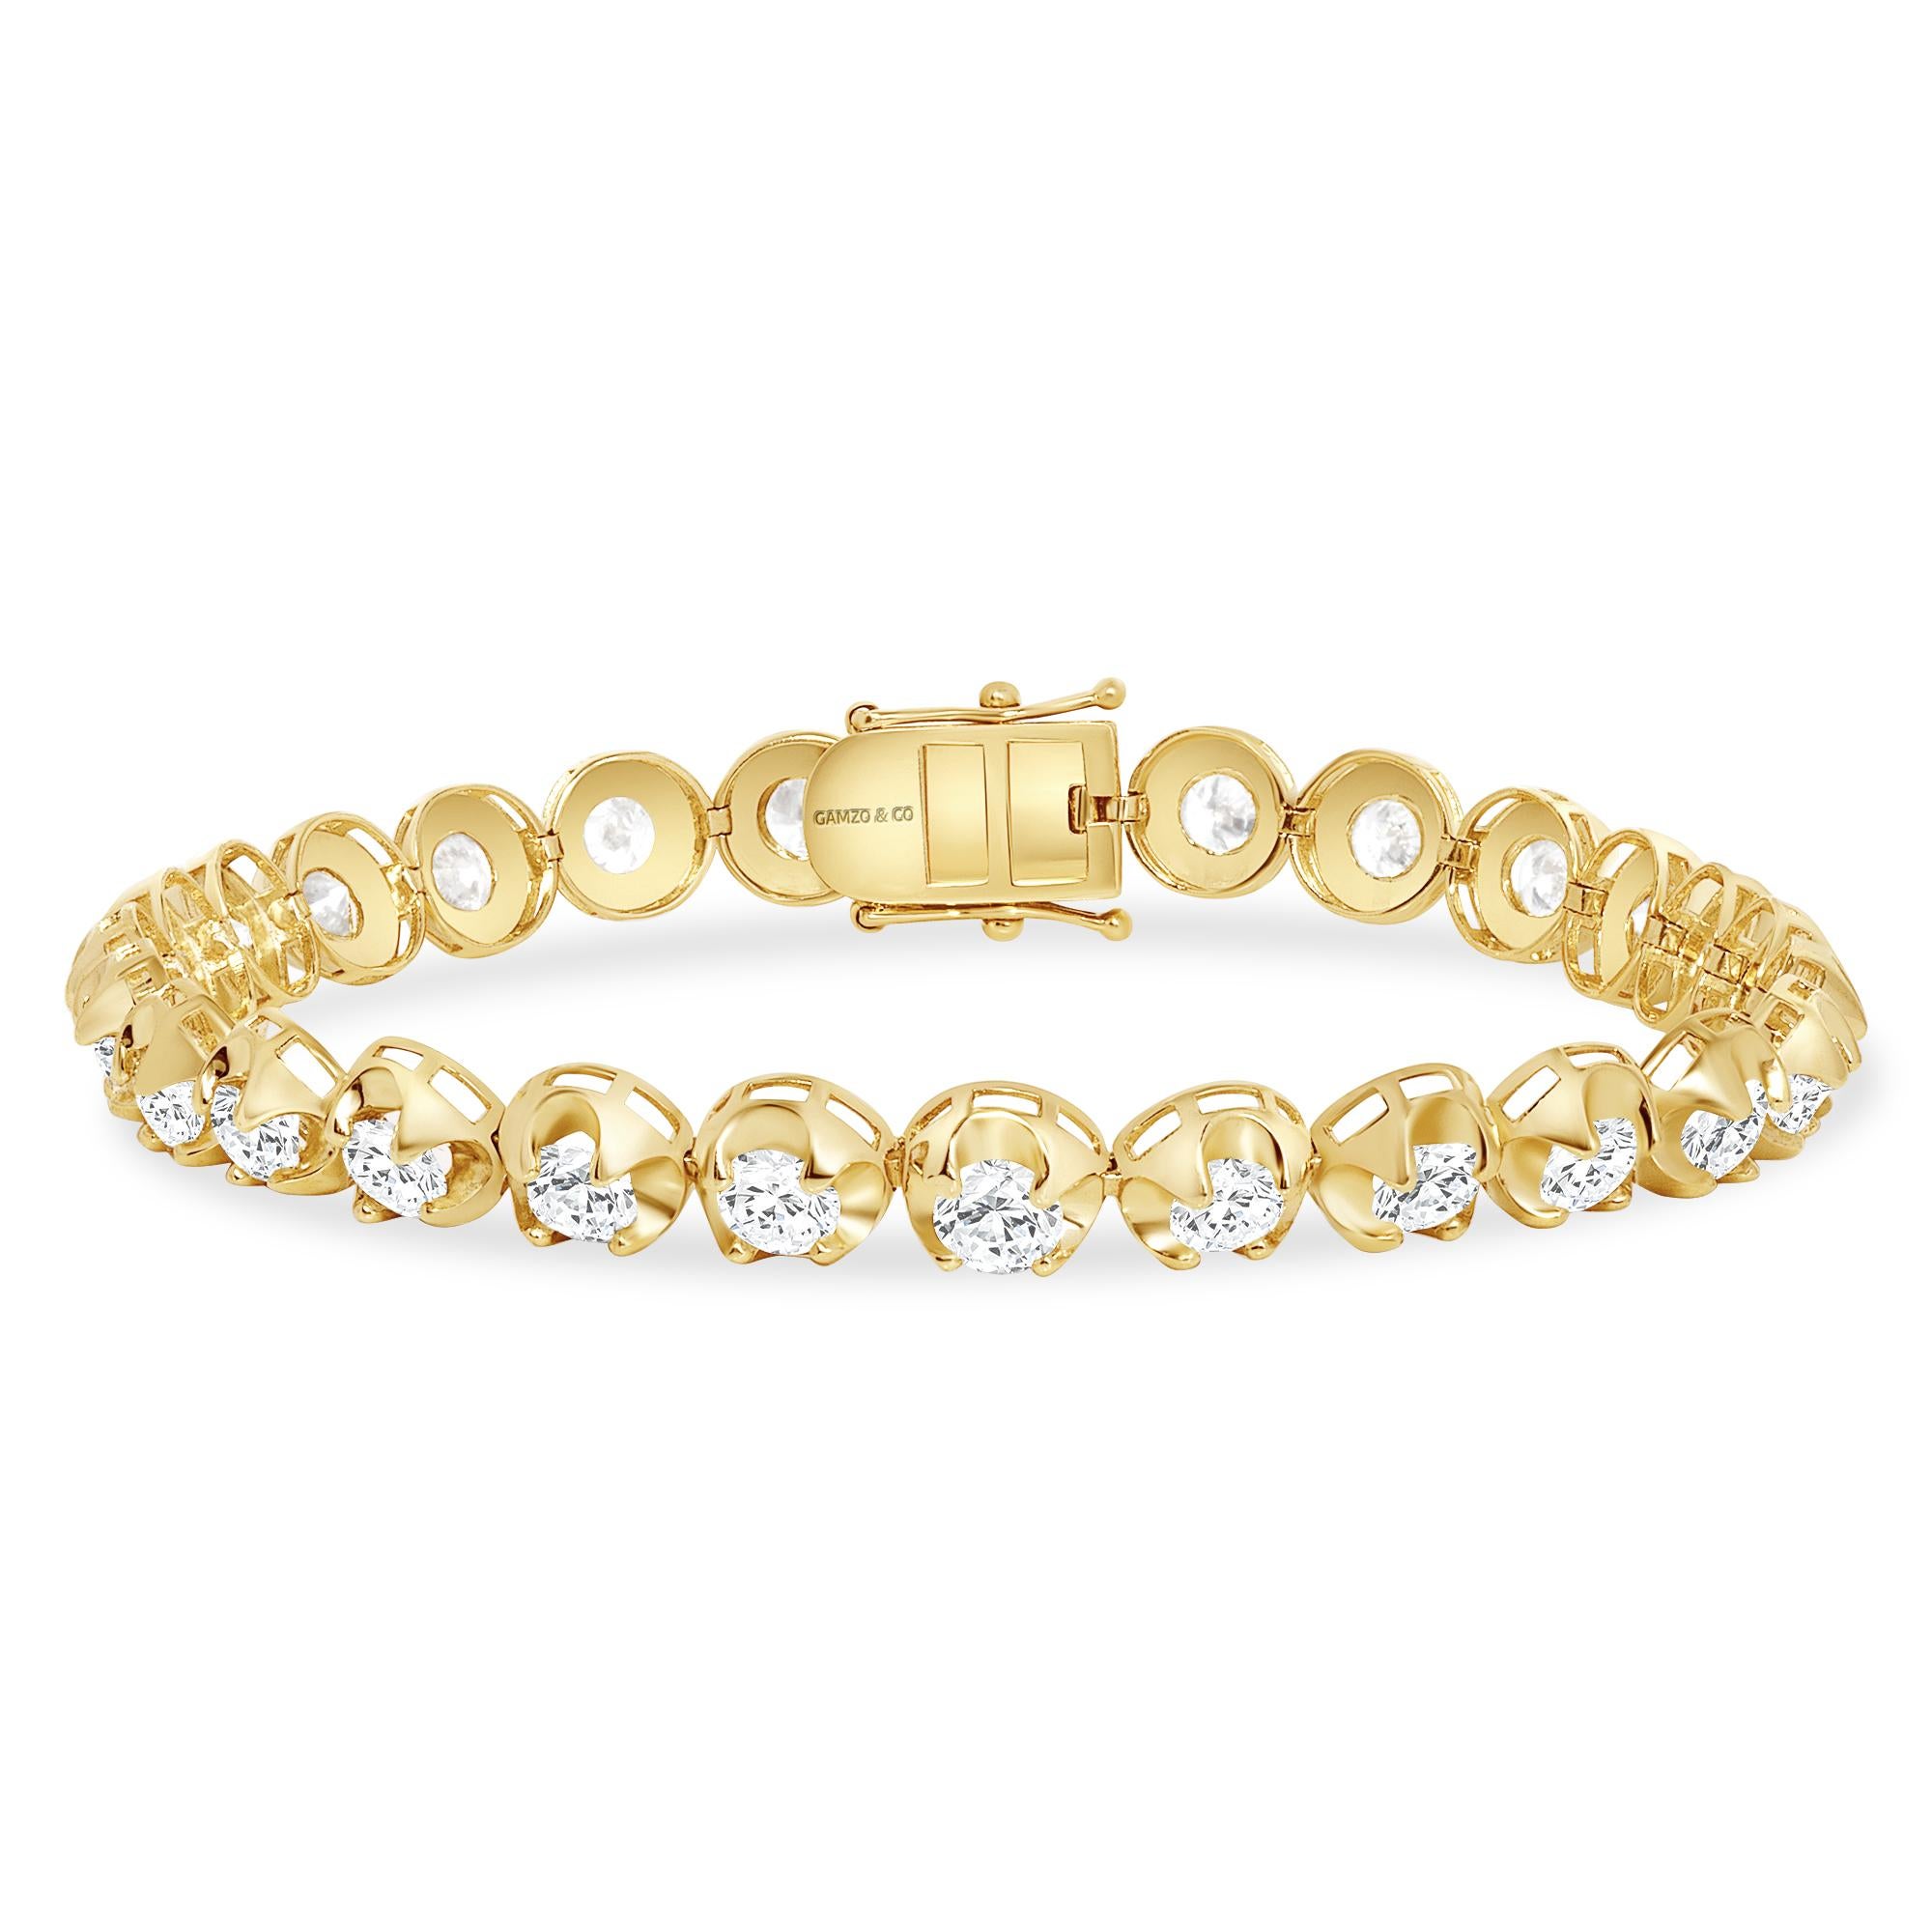 These beautiful round diamonds dance around your wrist as they absorb light and attention.
Metal: 14k Gold
Diamond Cut: Round
Diamond Total Carats: 7ct
Diamond Clarity: VS
Diamond Color: F
Color: Yellow Gold
Bracelet Length: 6.5 Inches 
Included